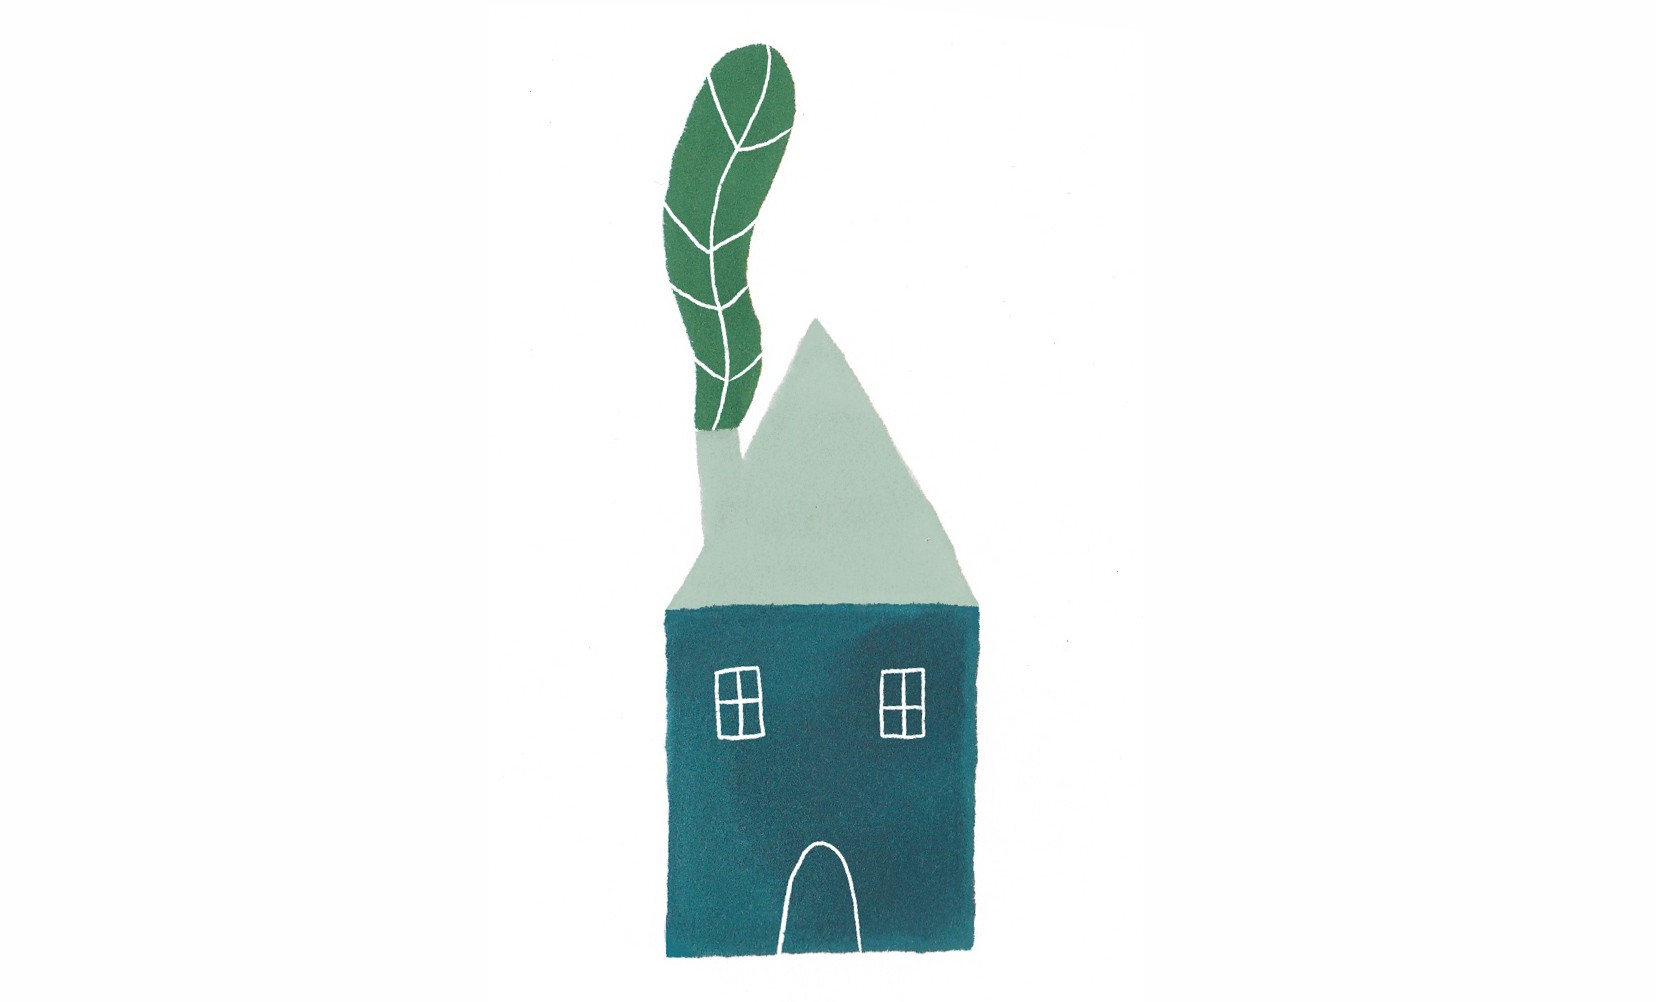 Illustration of a plant growing through of a house's chimney